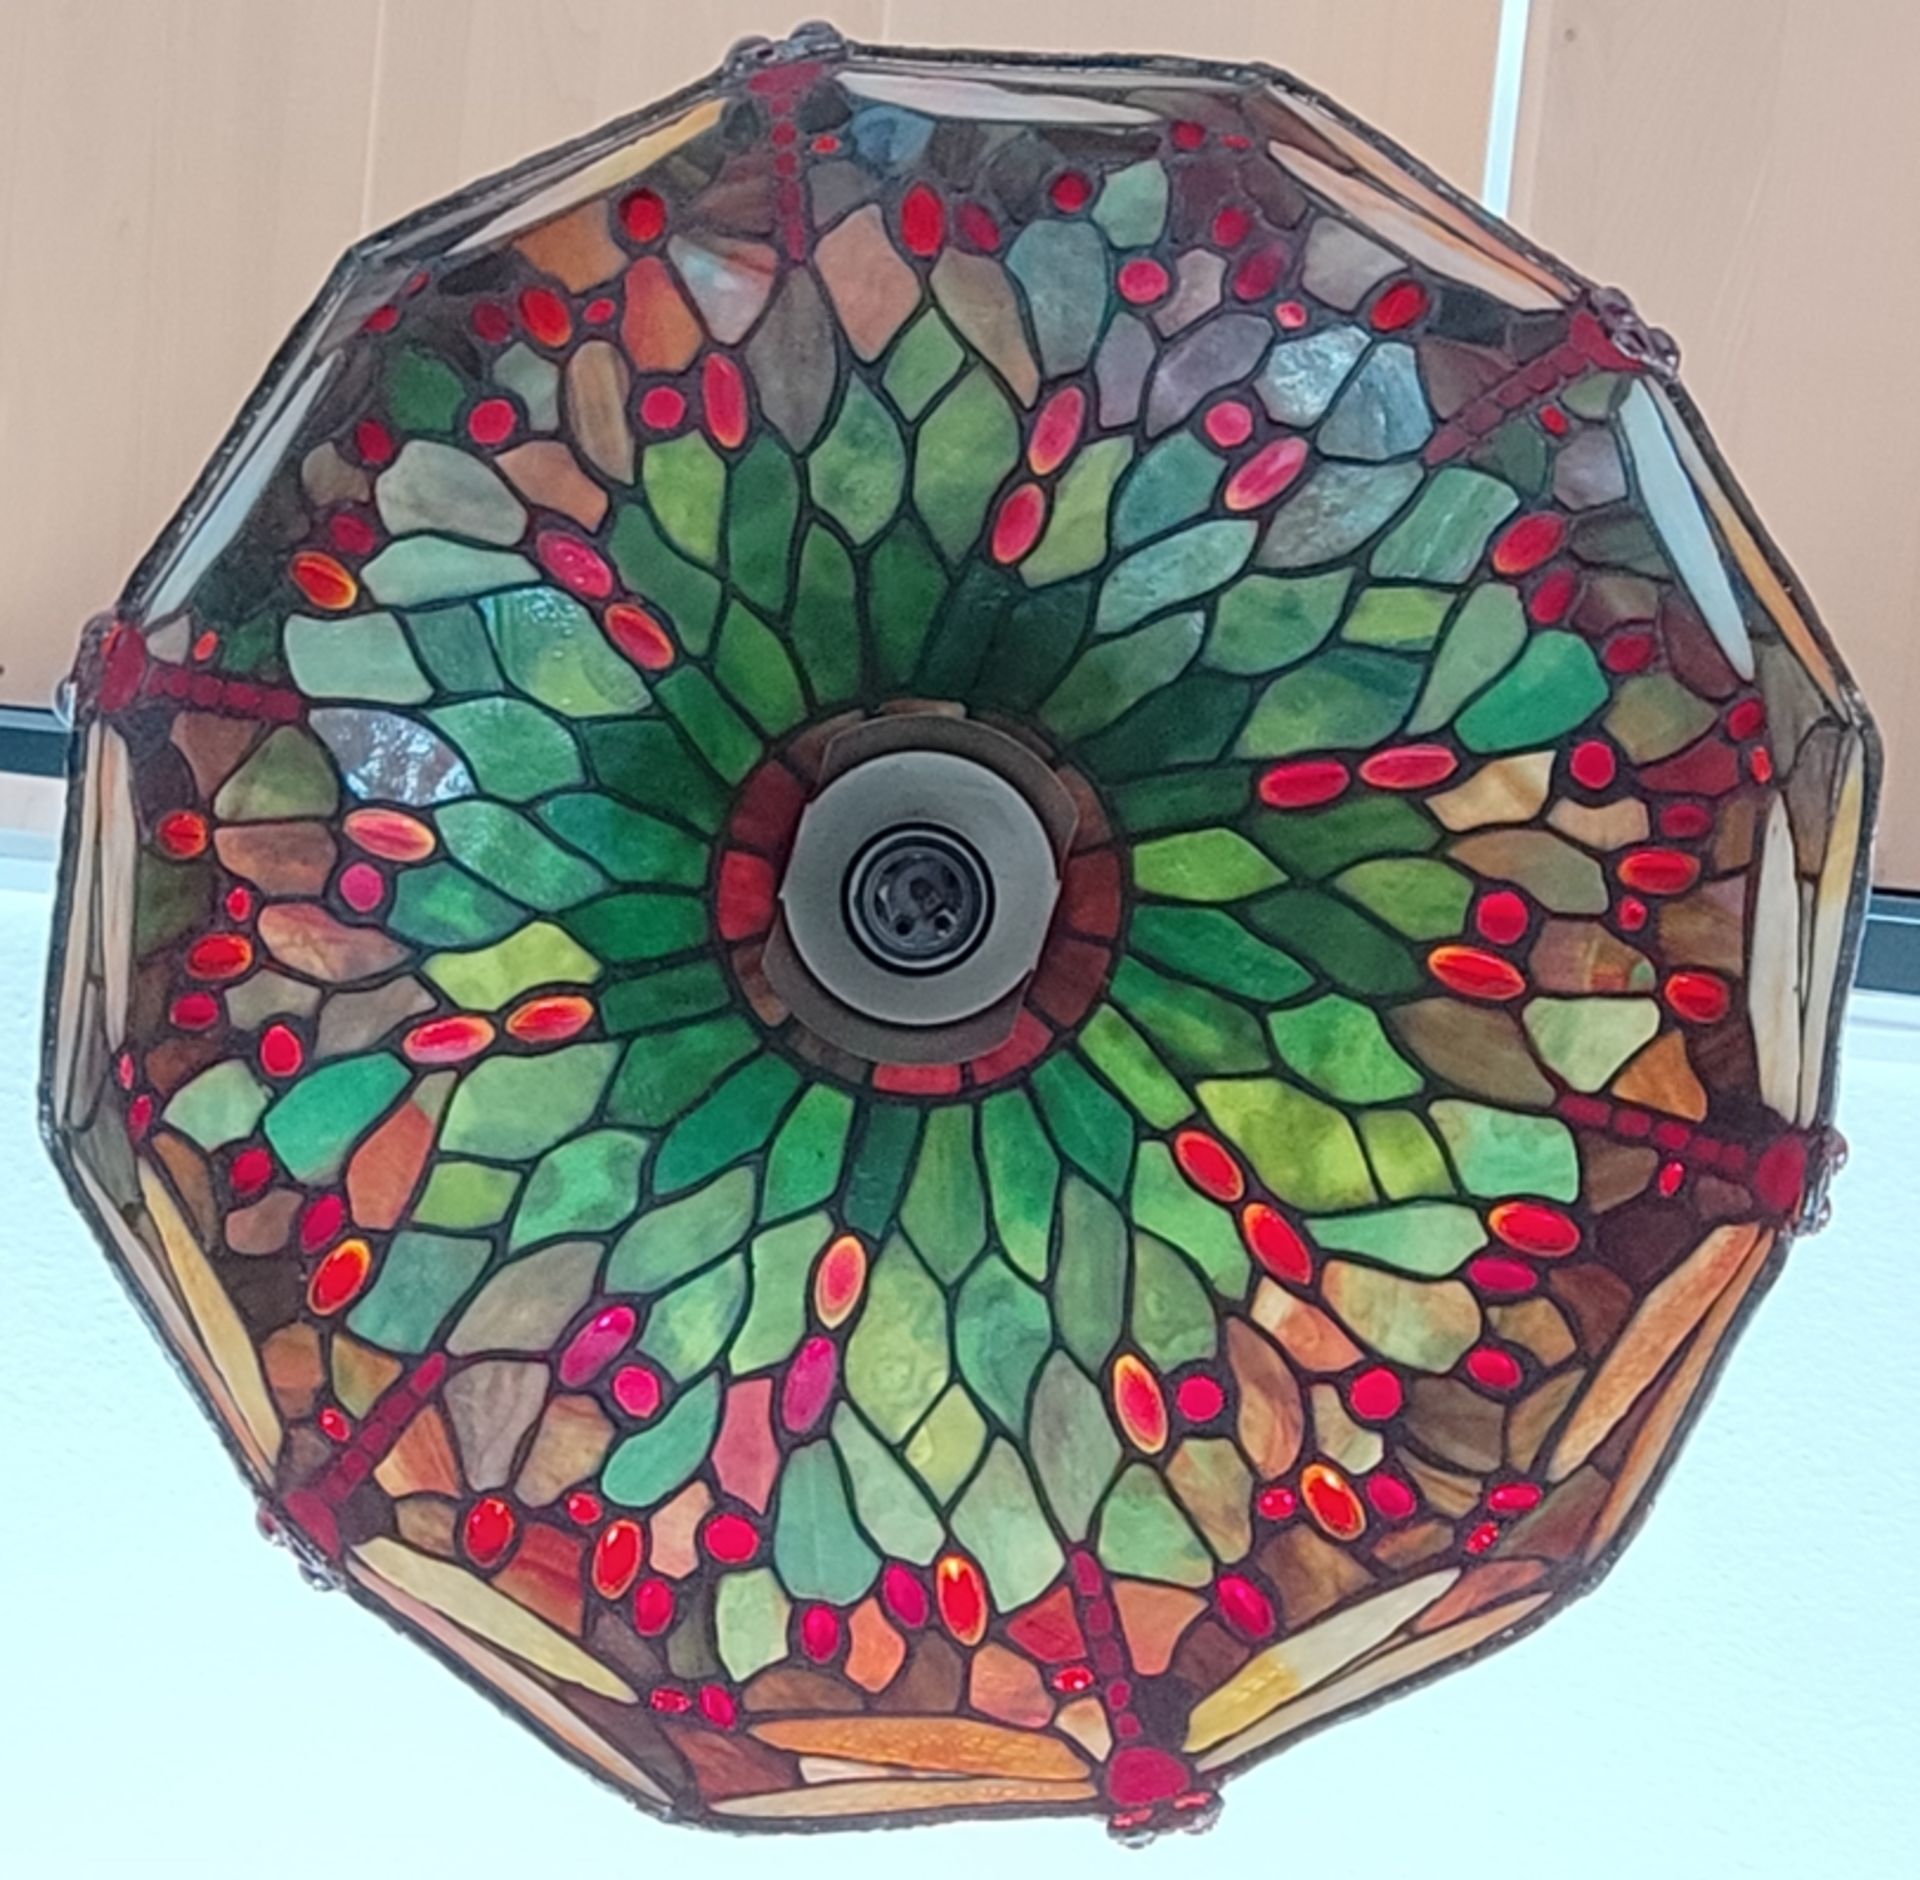 Tiffany-style lamp, Herne glass, lampshade decorated with dragonflies, diameter 43cm, function not - Image 3 of 3